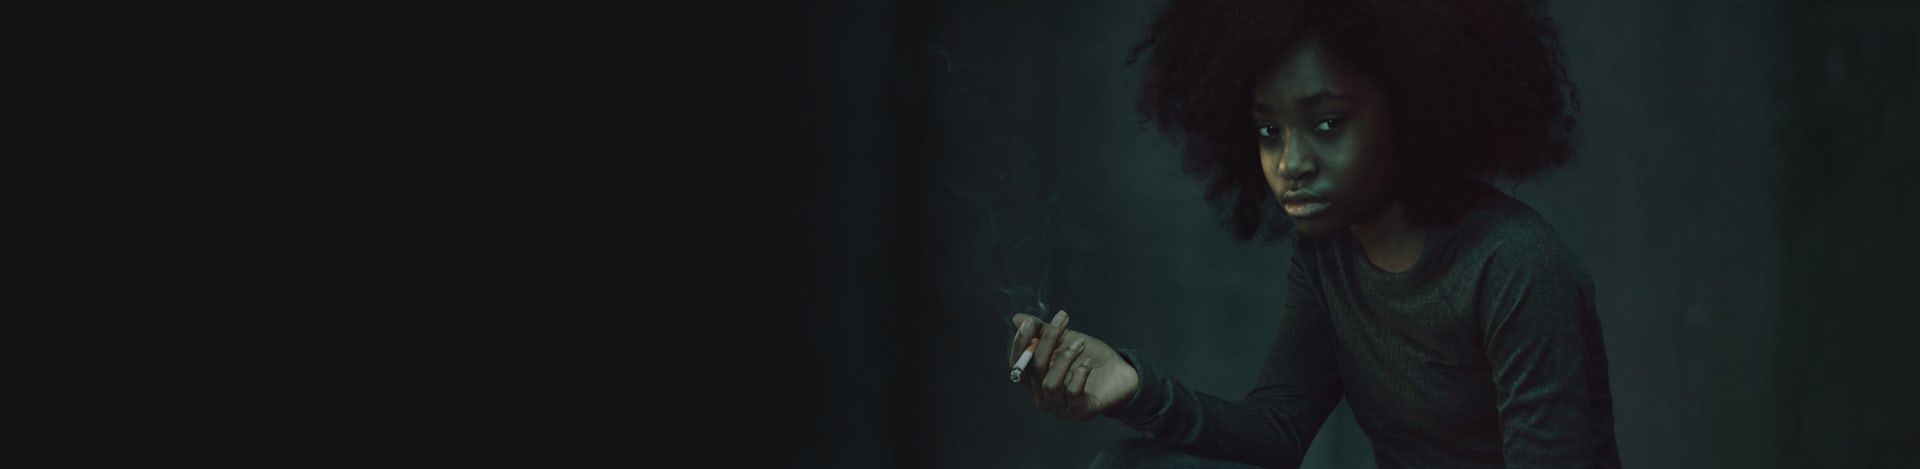 An African American/Black teen girl holding a cigarette in a dark room